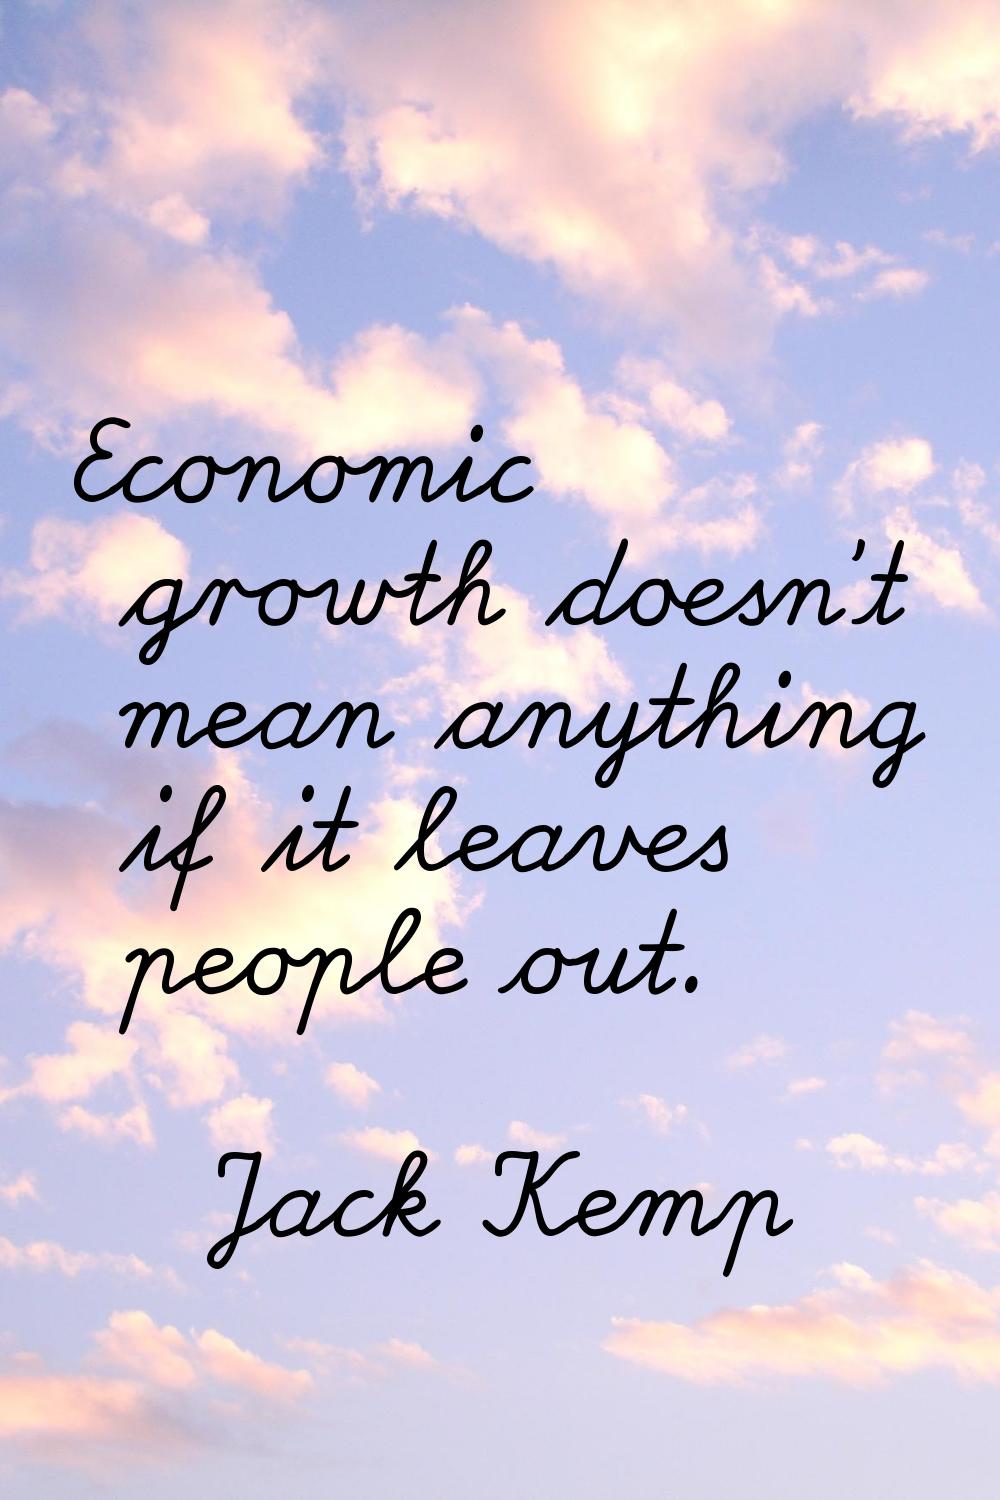 Economic growth doesn't mean anything if it leaves people out.